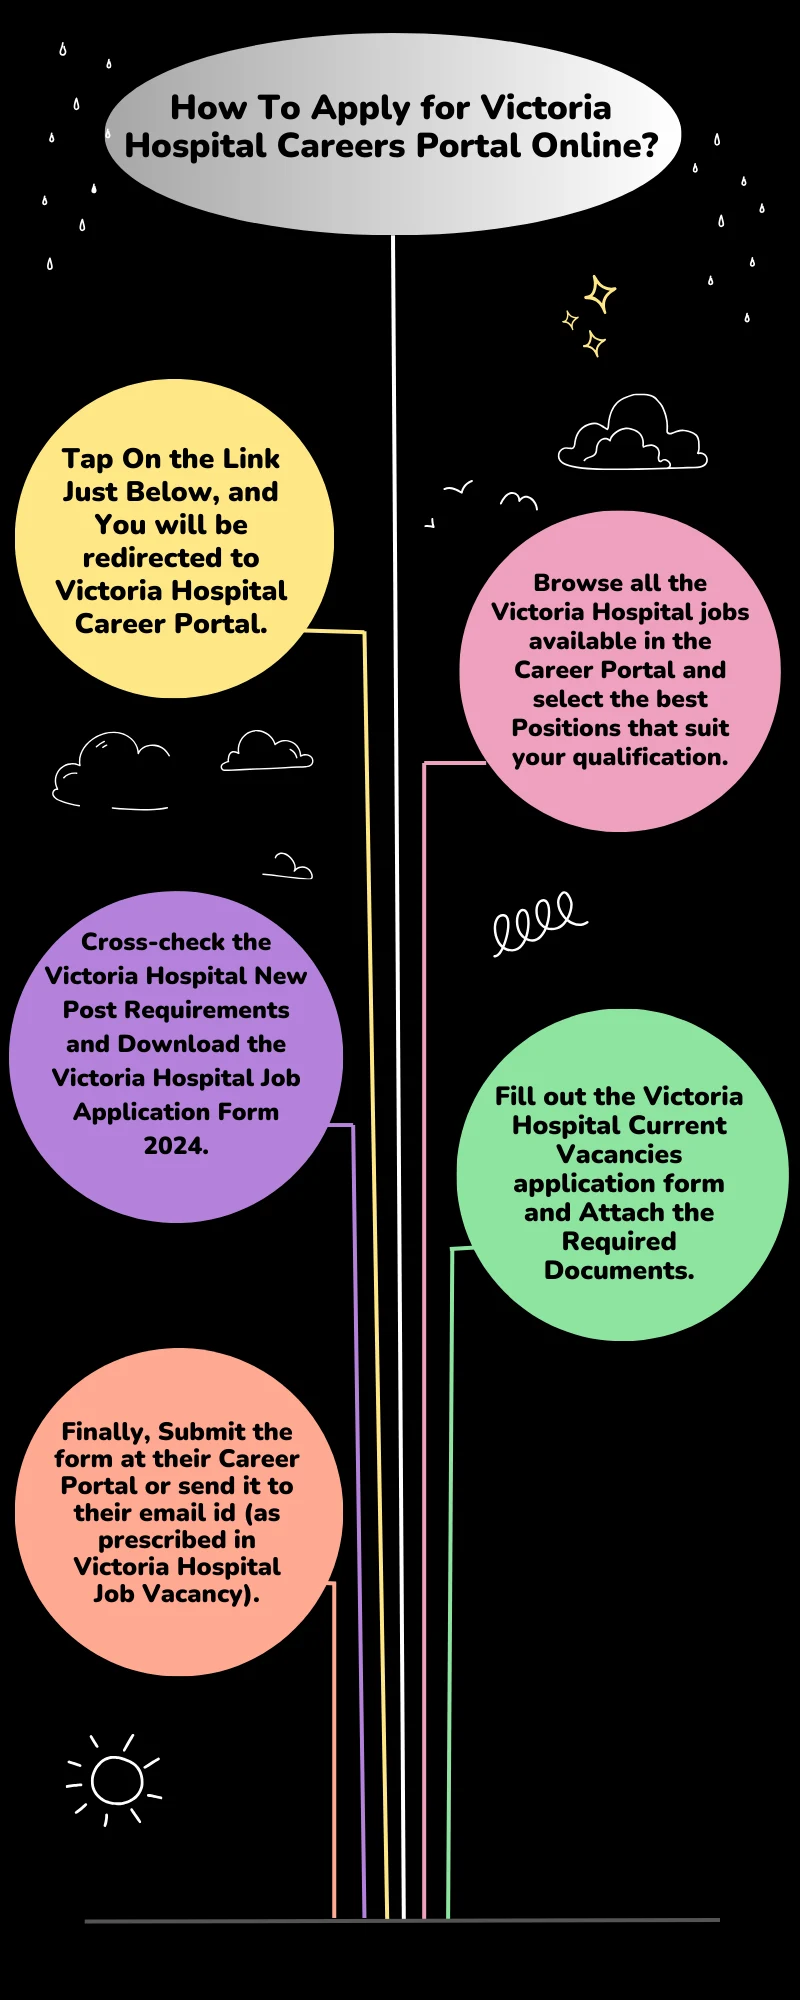 How To Apply for Victoria Hospital Careers Portal Online?